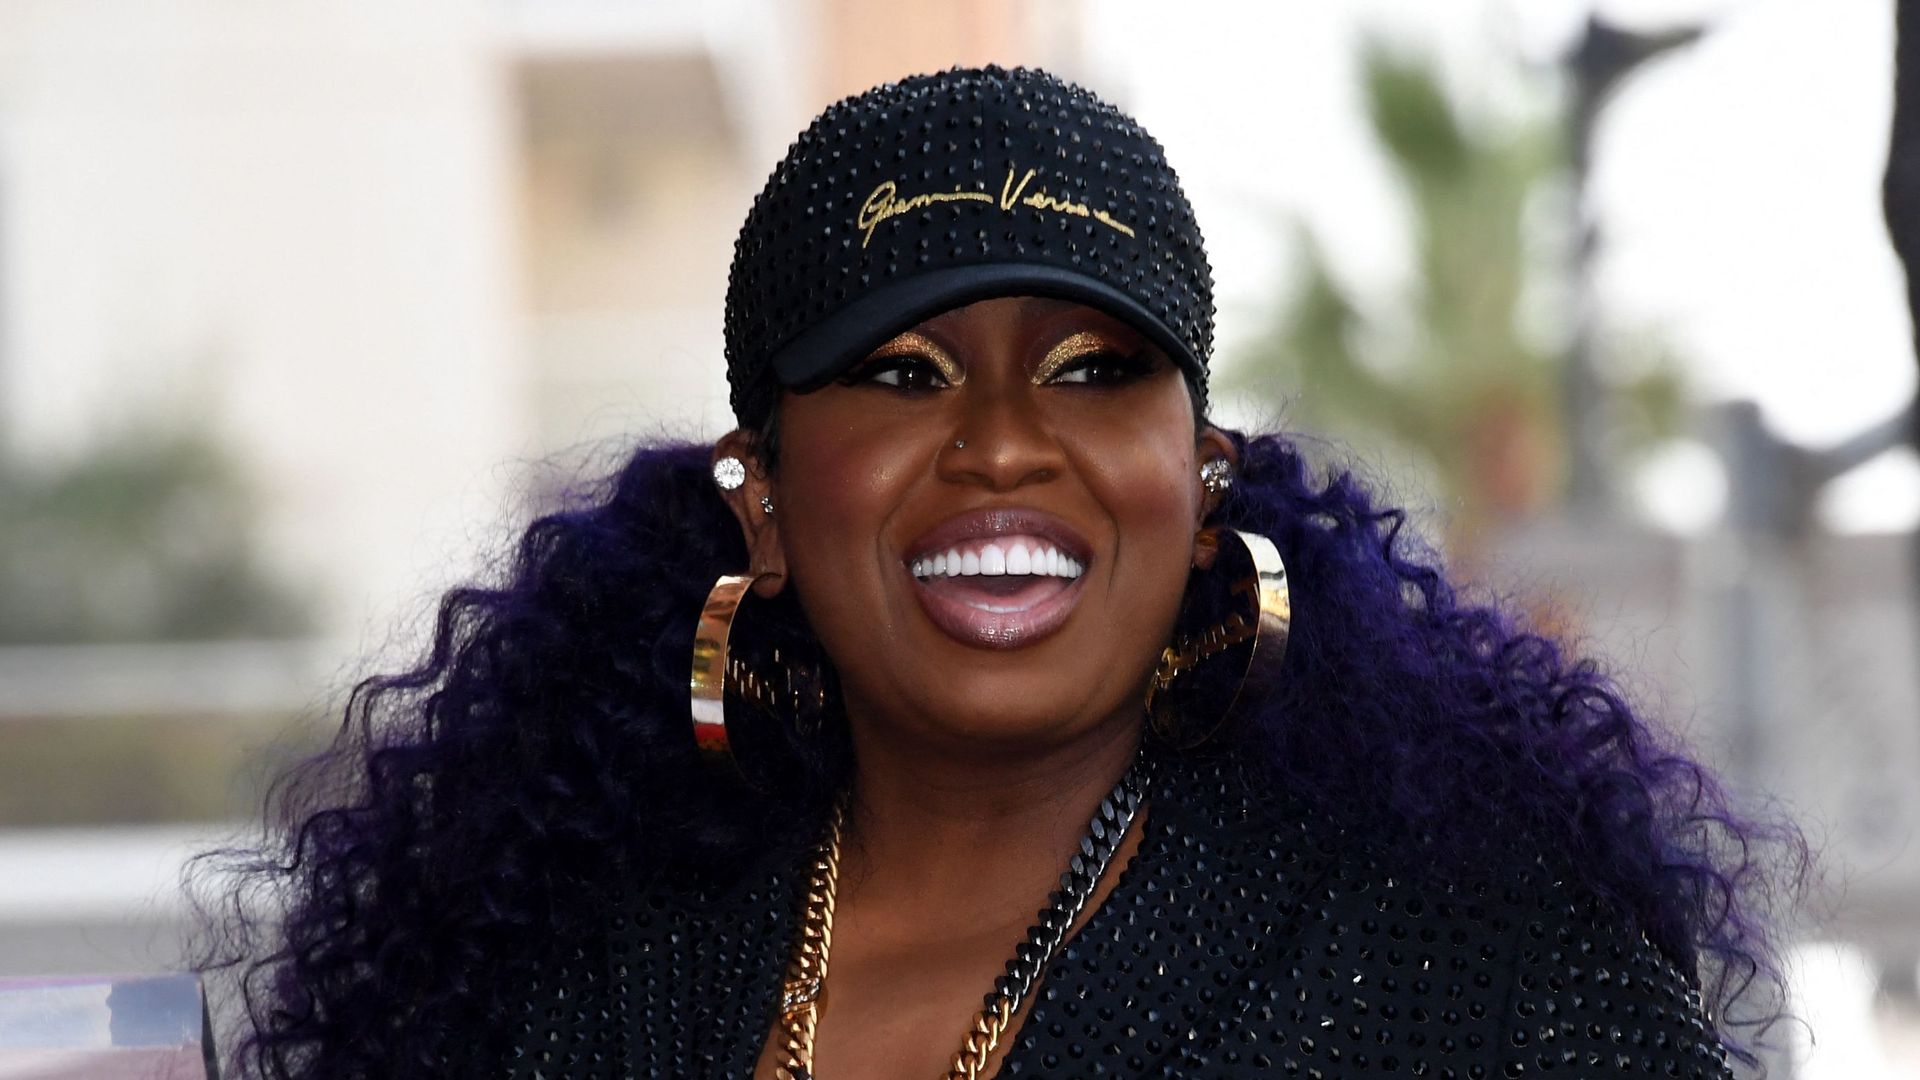 US hip hop recording artist Missy Elliott smiles during the ceremony to honor her with the 2,708th star on the Hollywood Walk of Fame in Los Angeles, California on November 8, 2021.